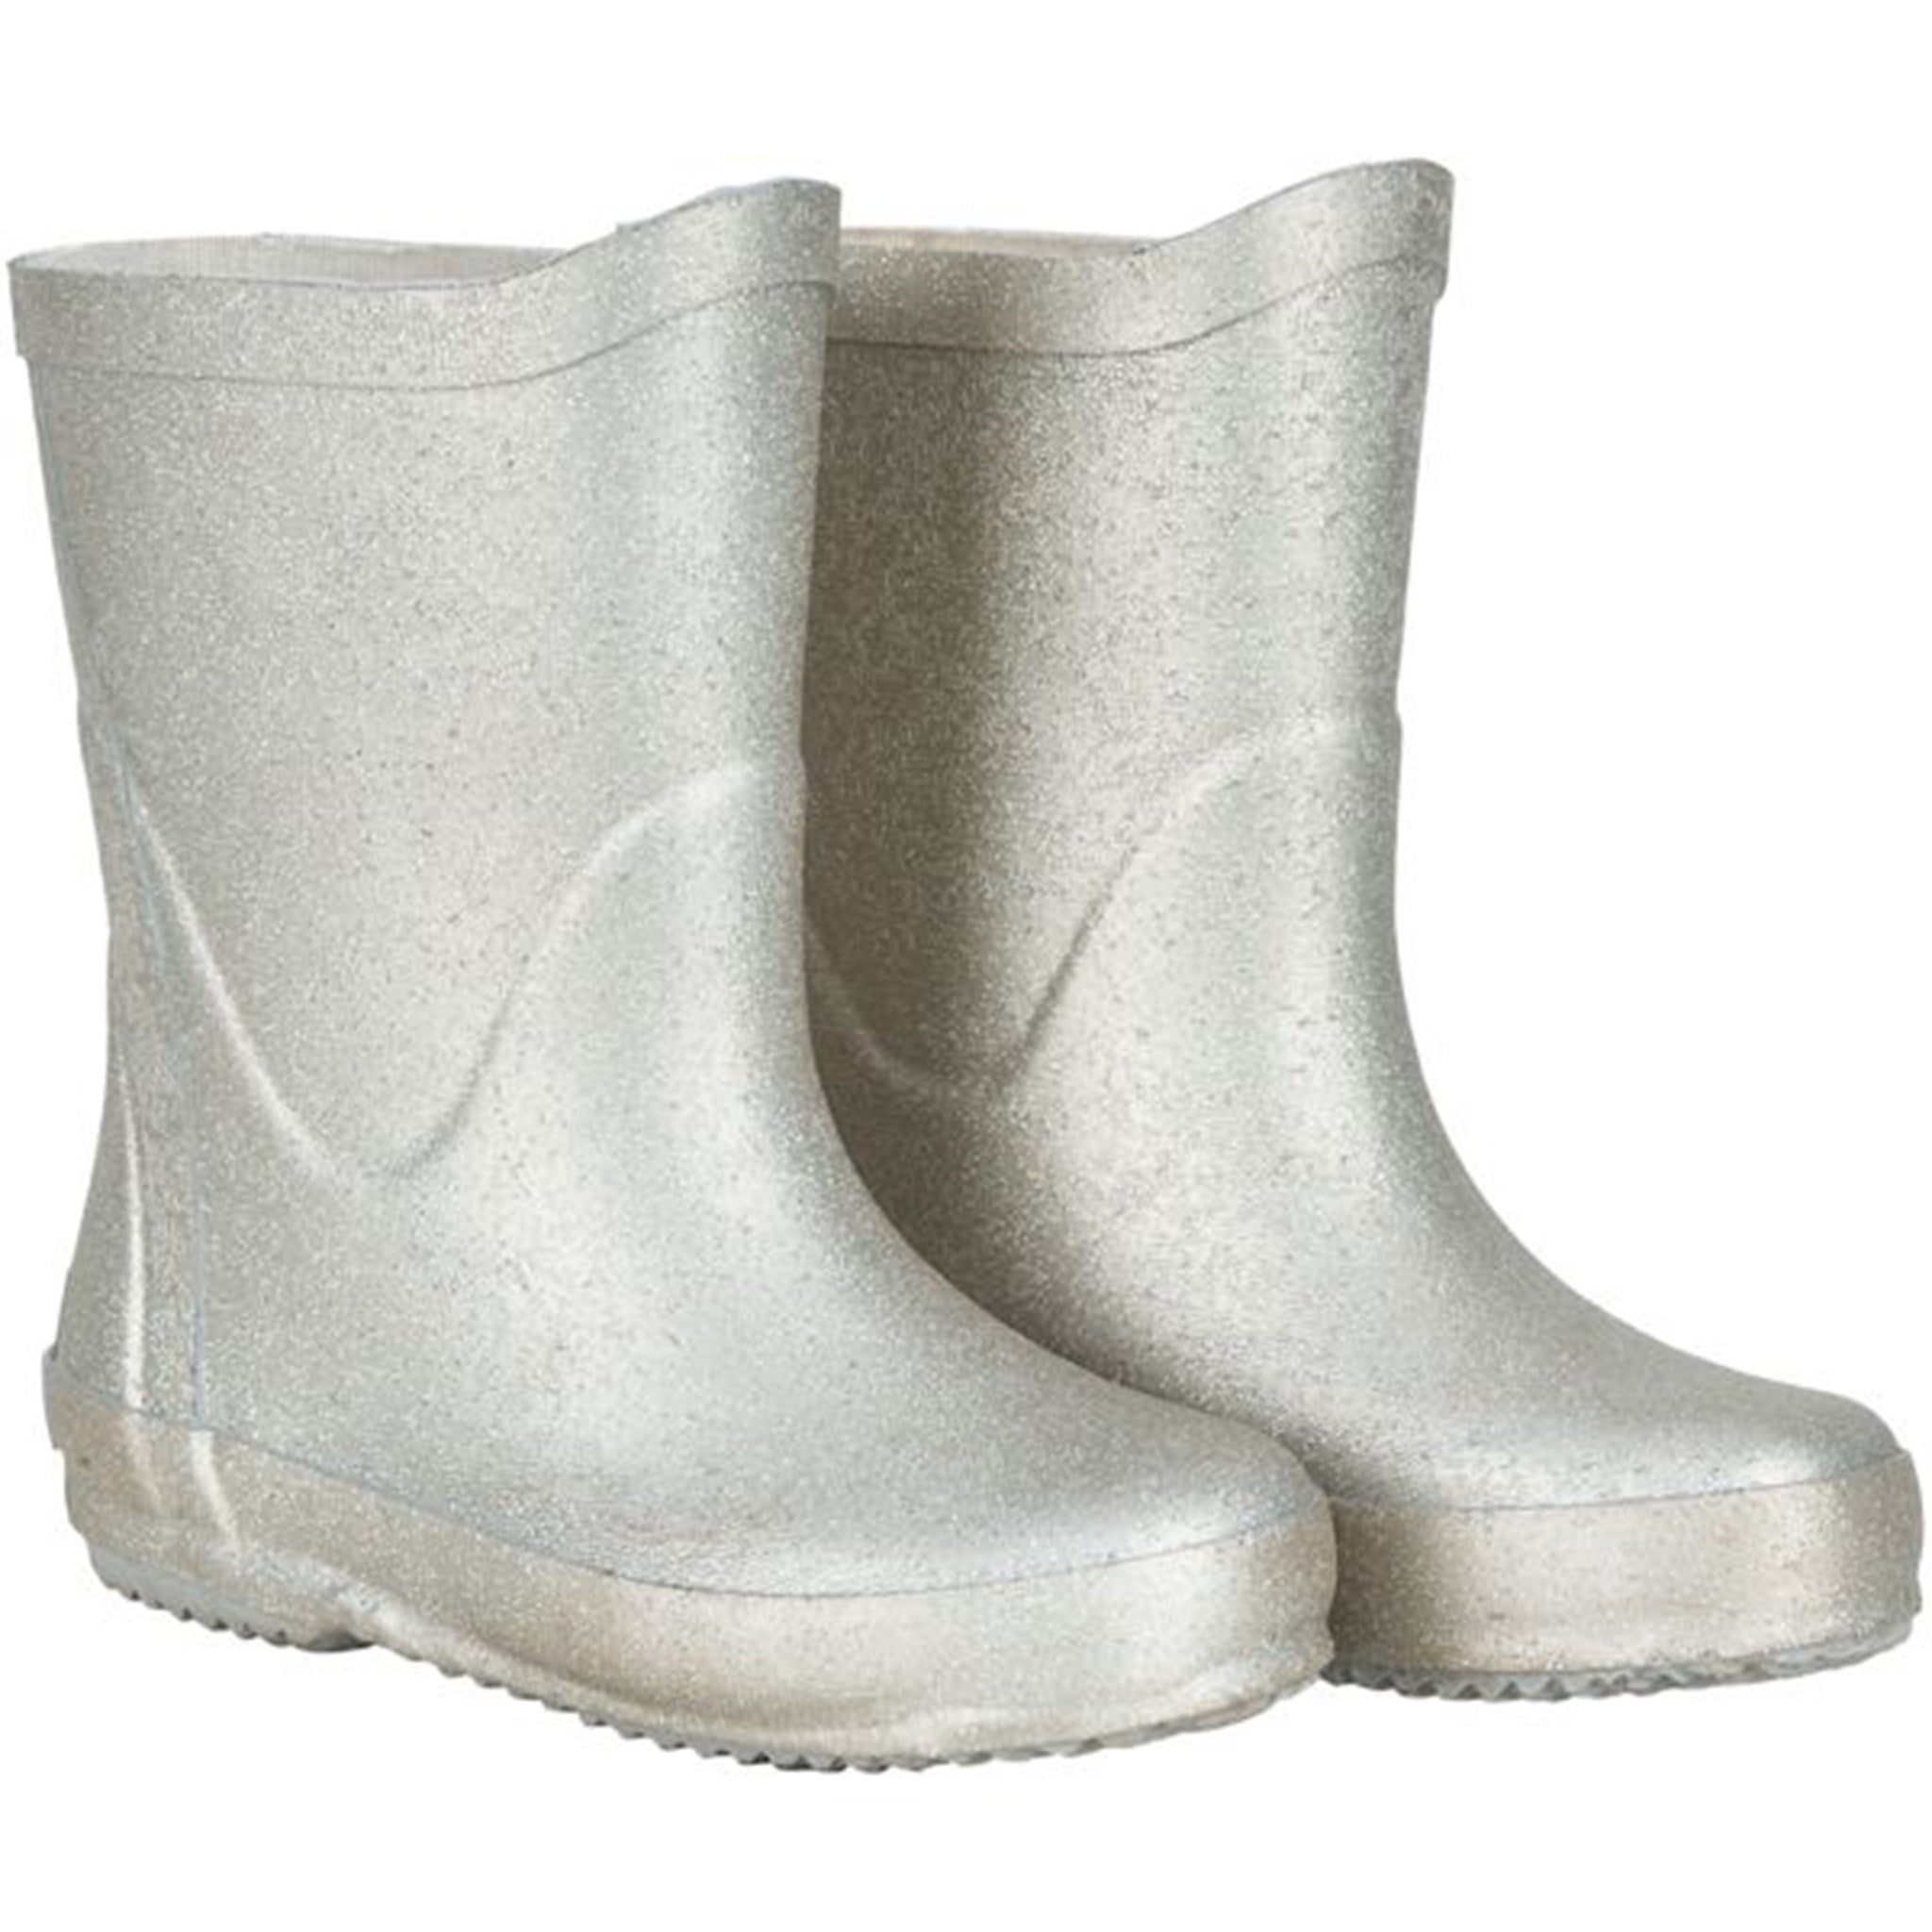 CeLaVi Wellies New Basic Boot Silver